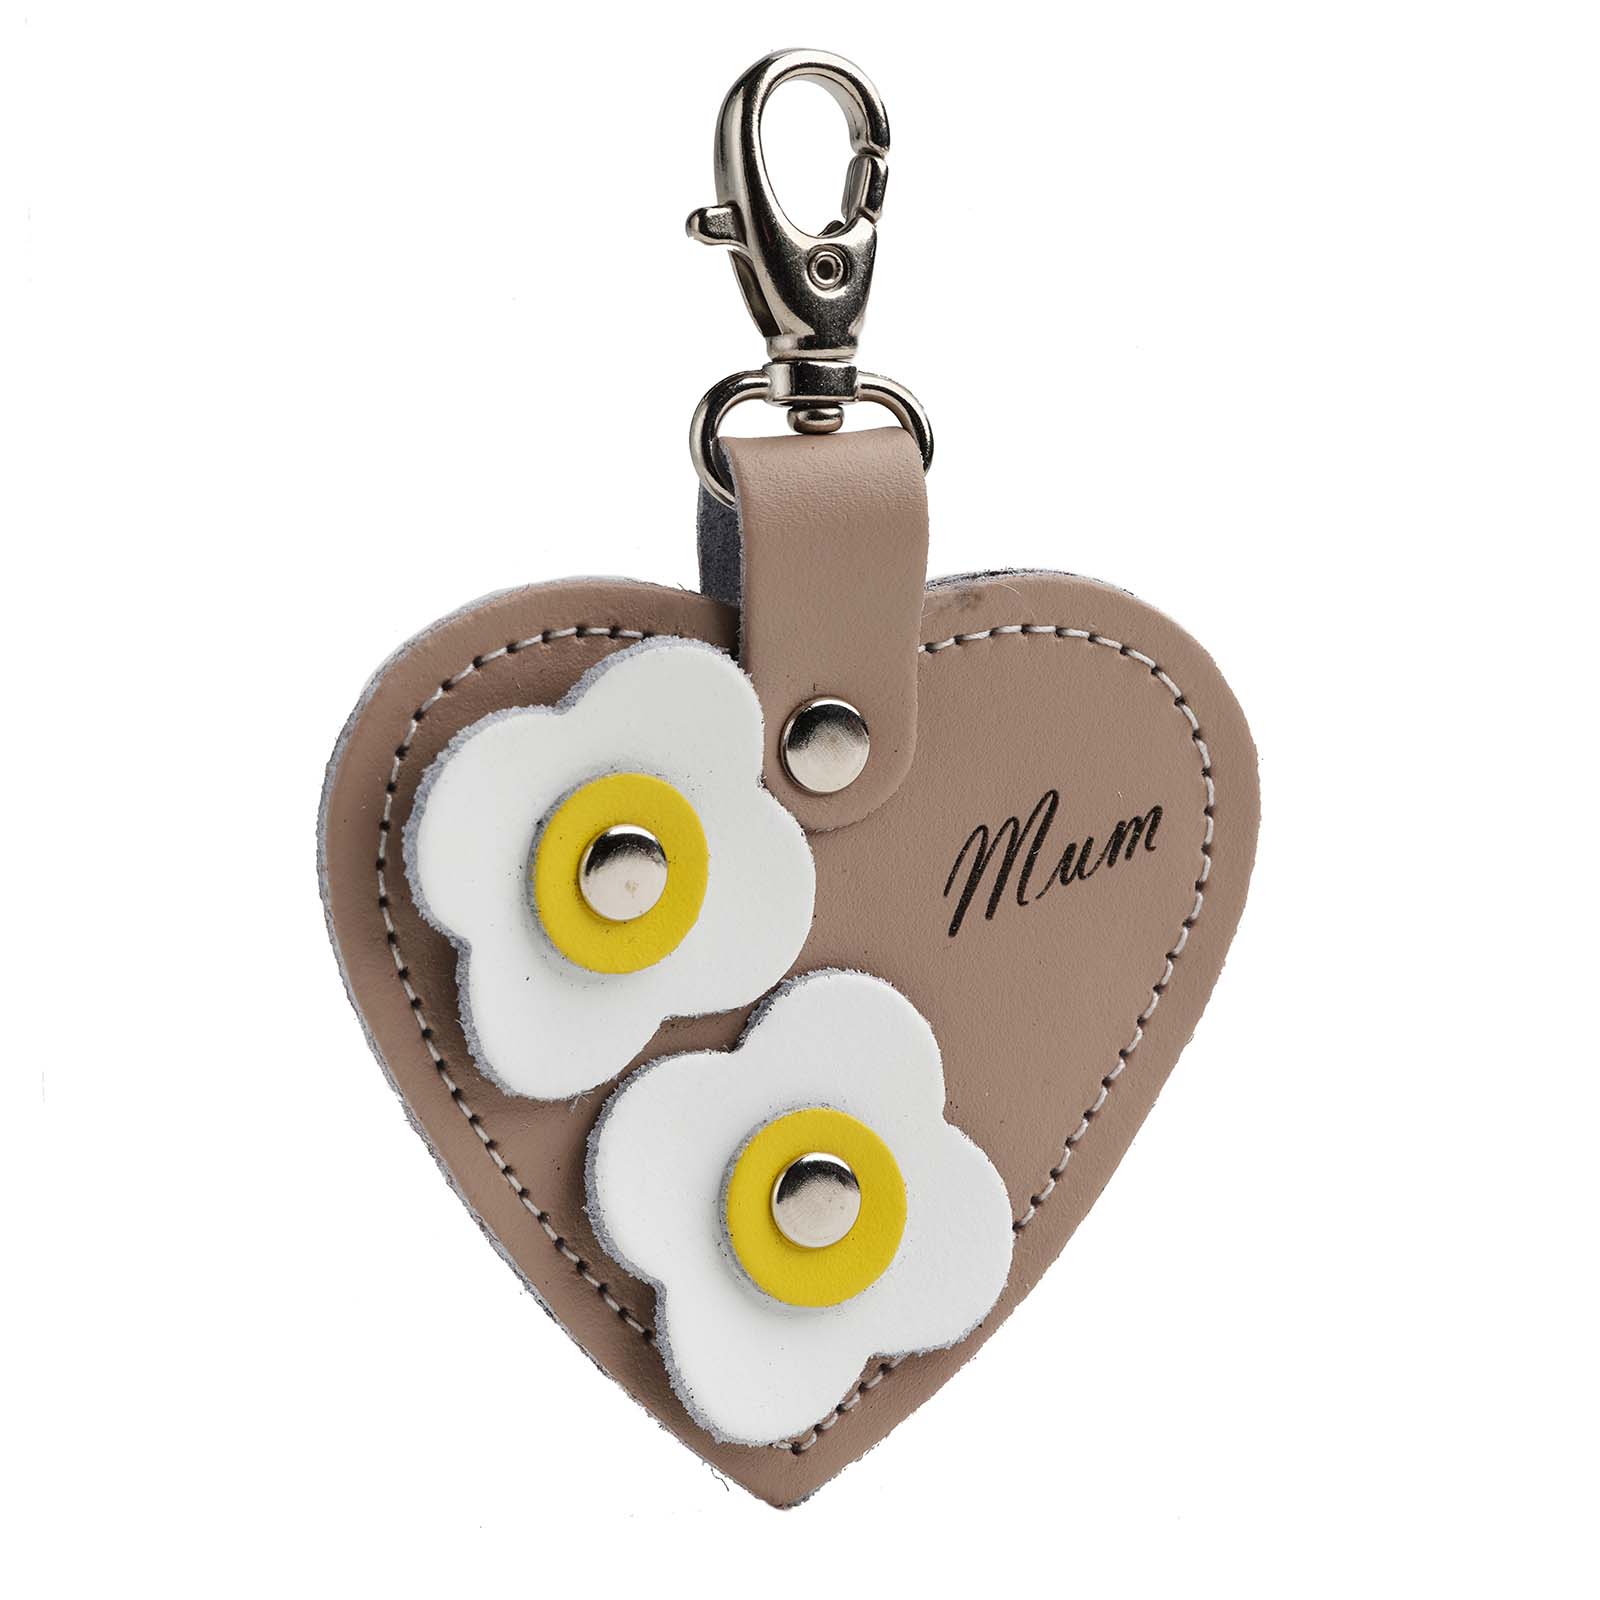 Love heart bag charm - with 'Mum' engraving and flower appliques - Ice ...